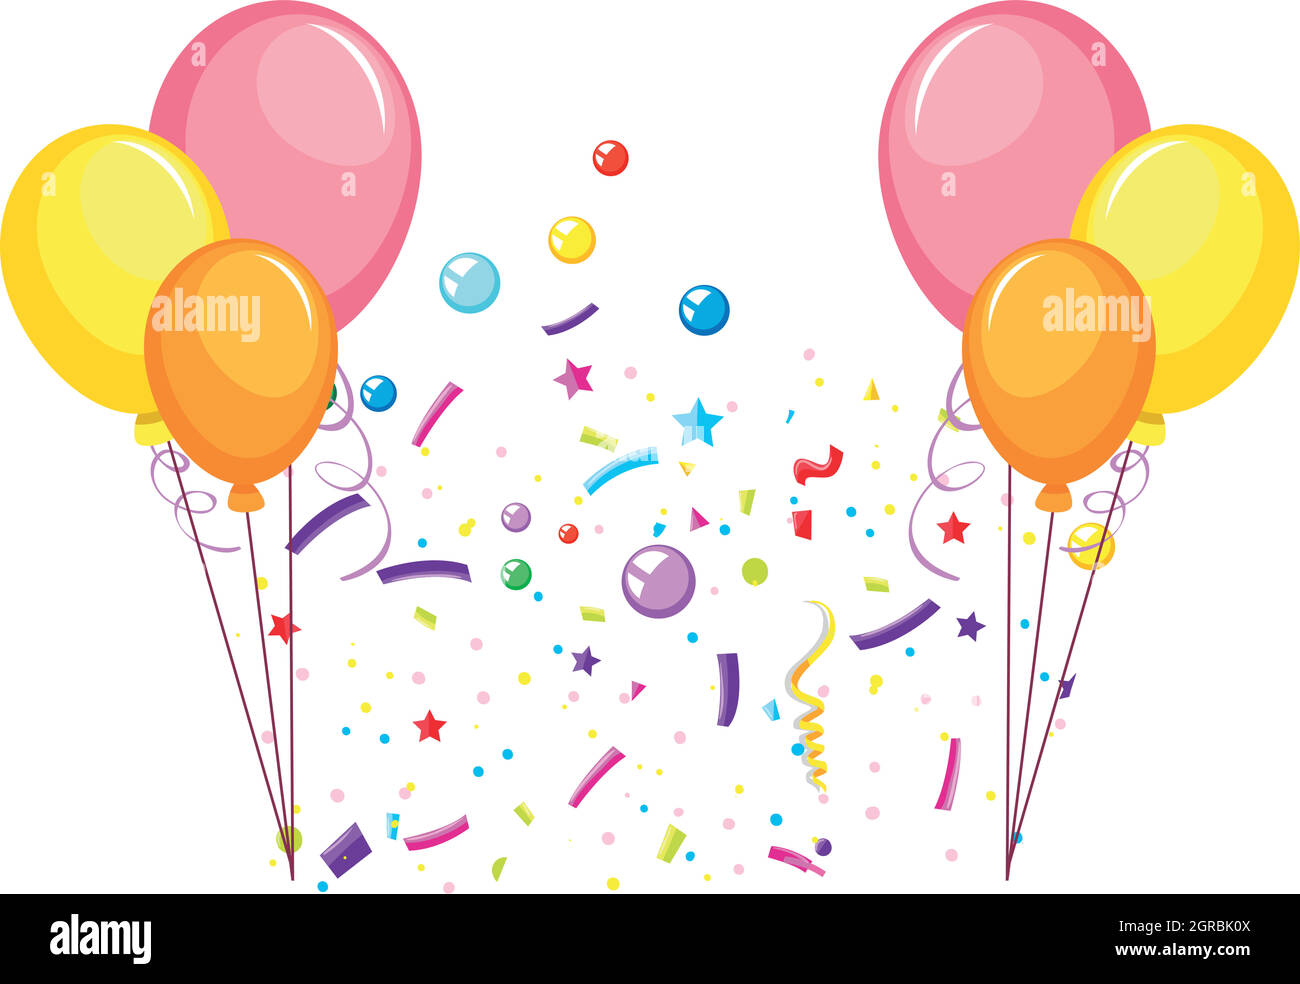 Celebrate party with balloons Stock Vector